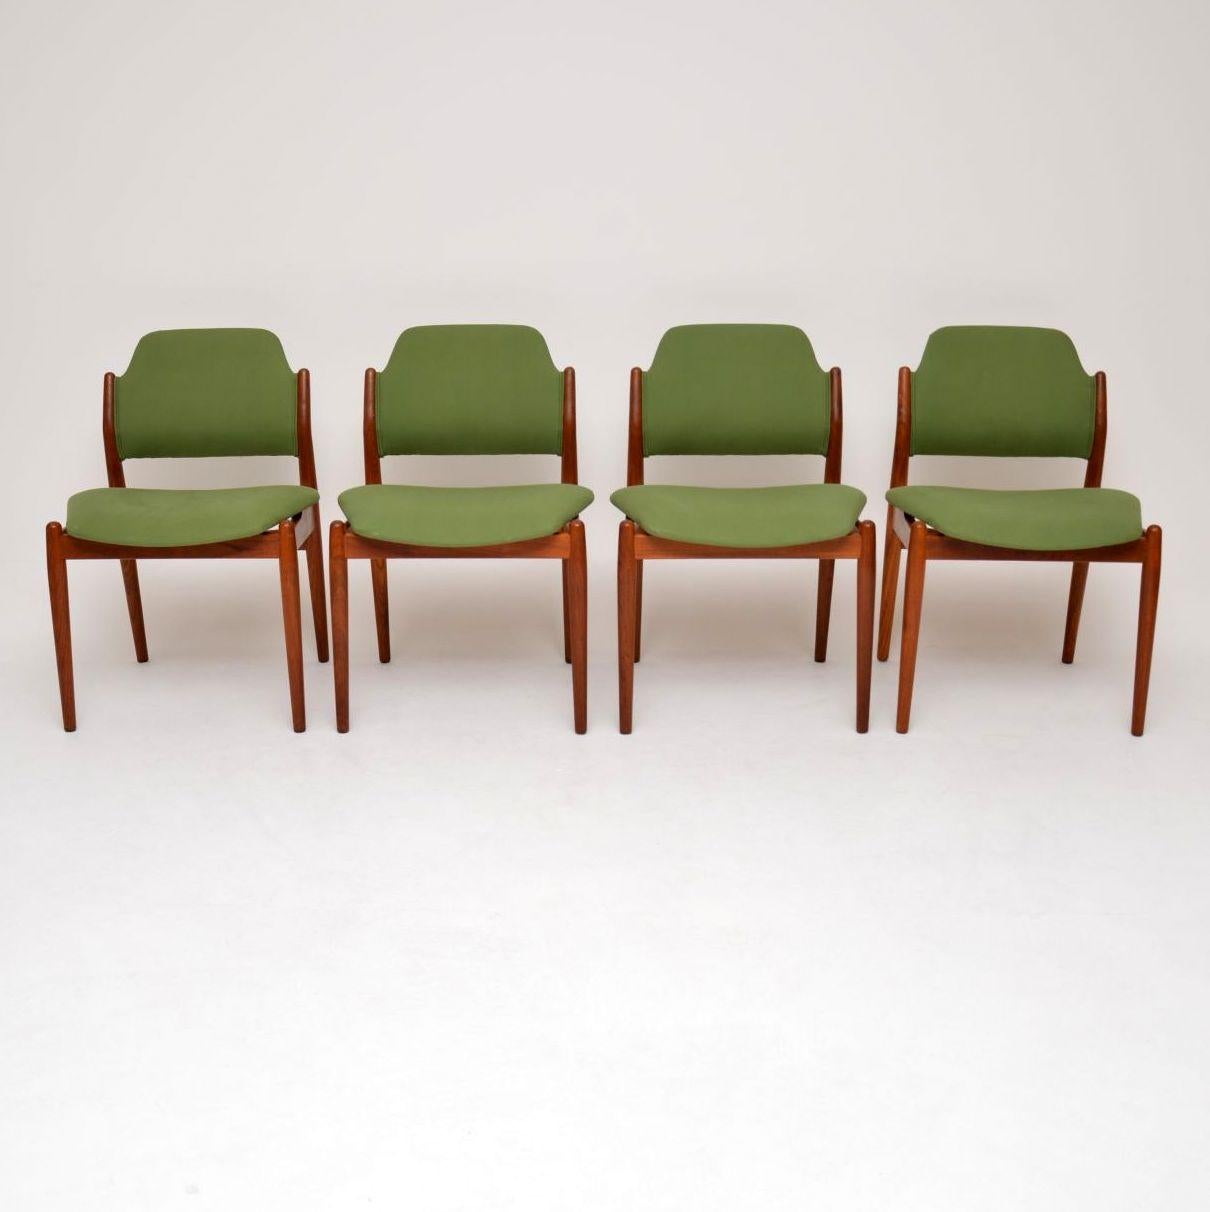 A beautifully designed and rare set of four Danish vintage dining chairs in teak. These were designed by Arne Vodder for Sibast, they date from the 1960’s. The quality is amazing and the condition is excellent for their age. We have had them fully